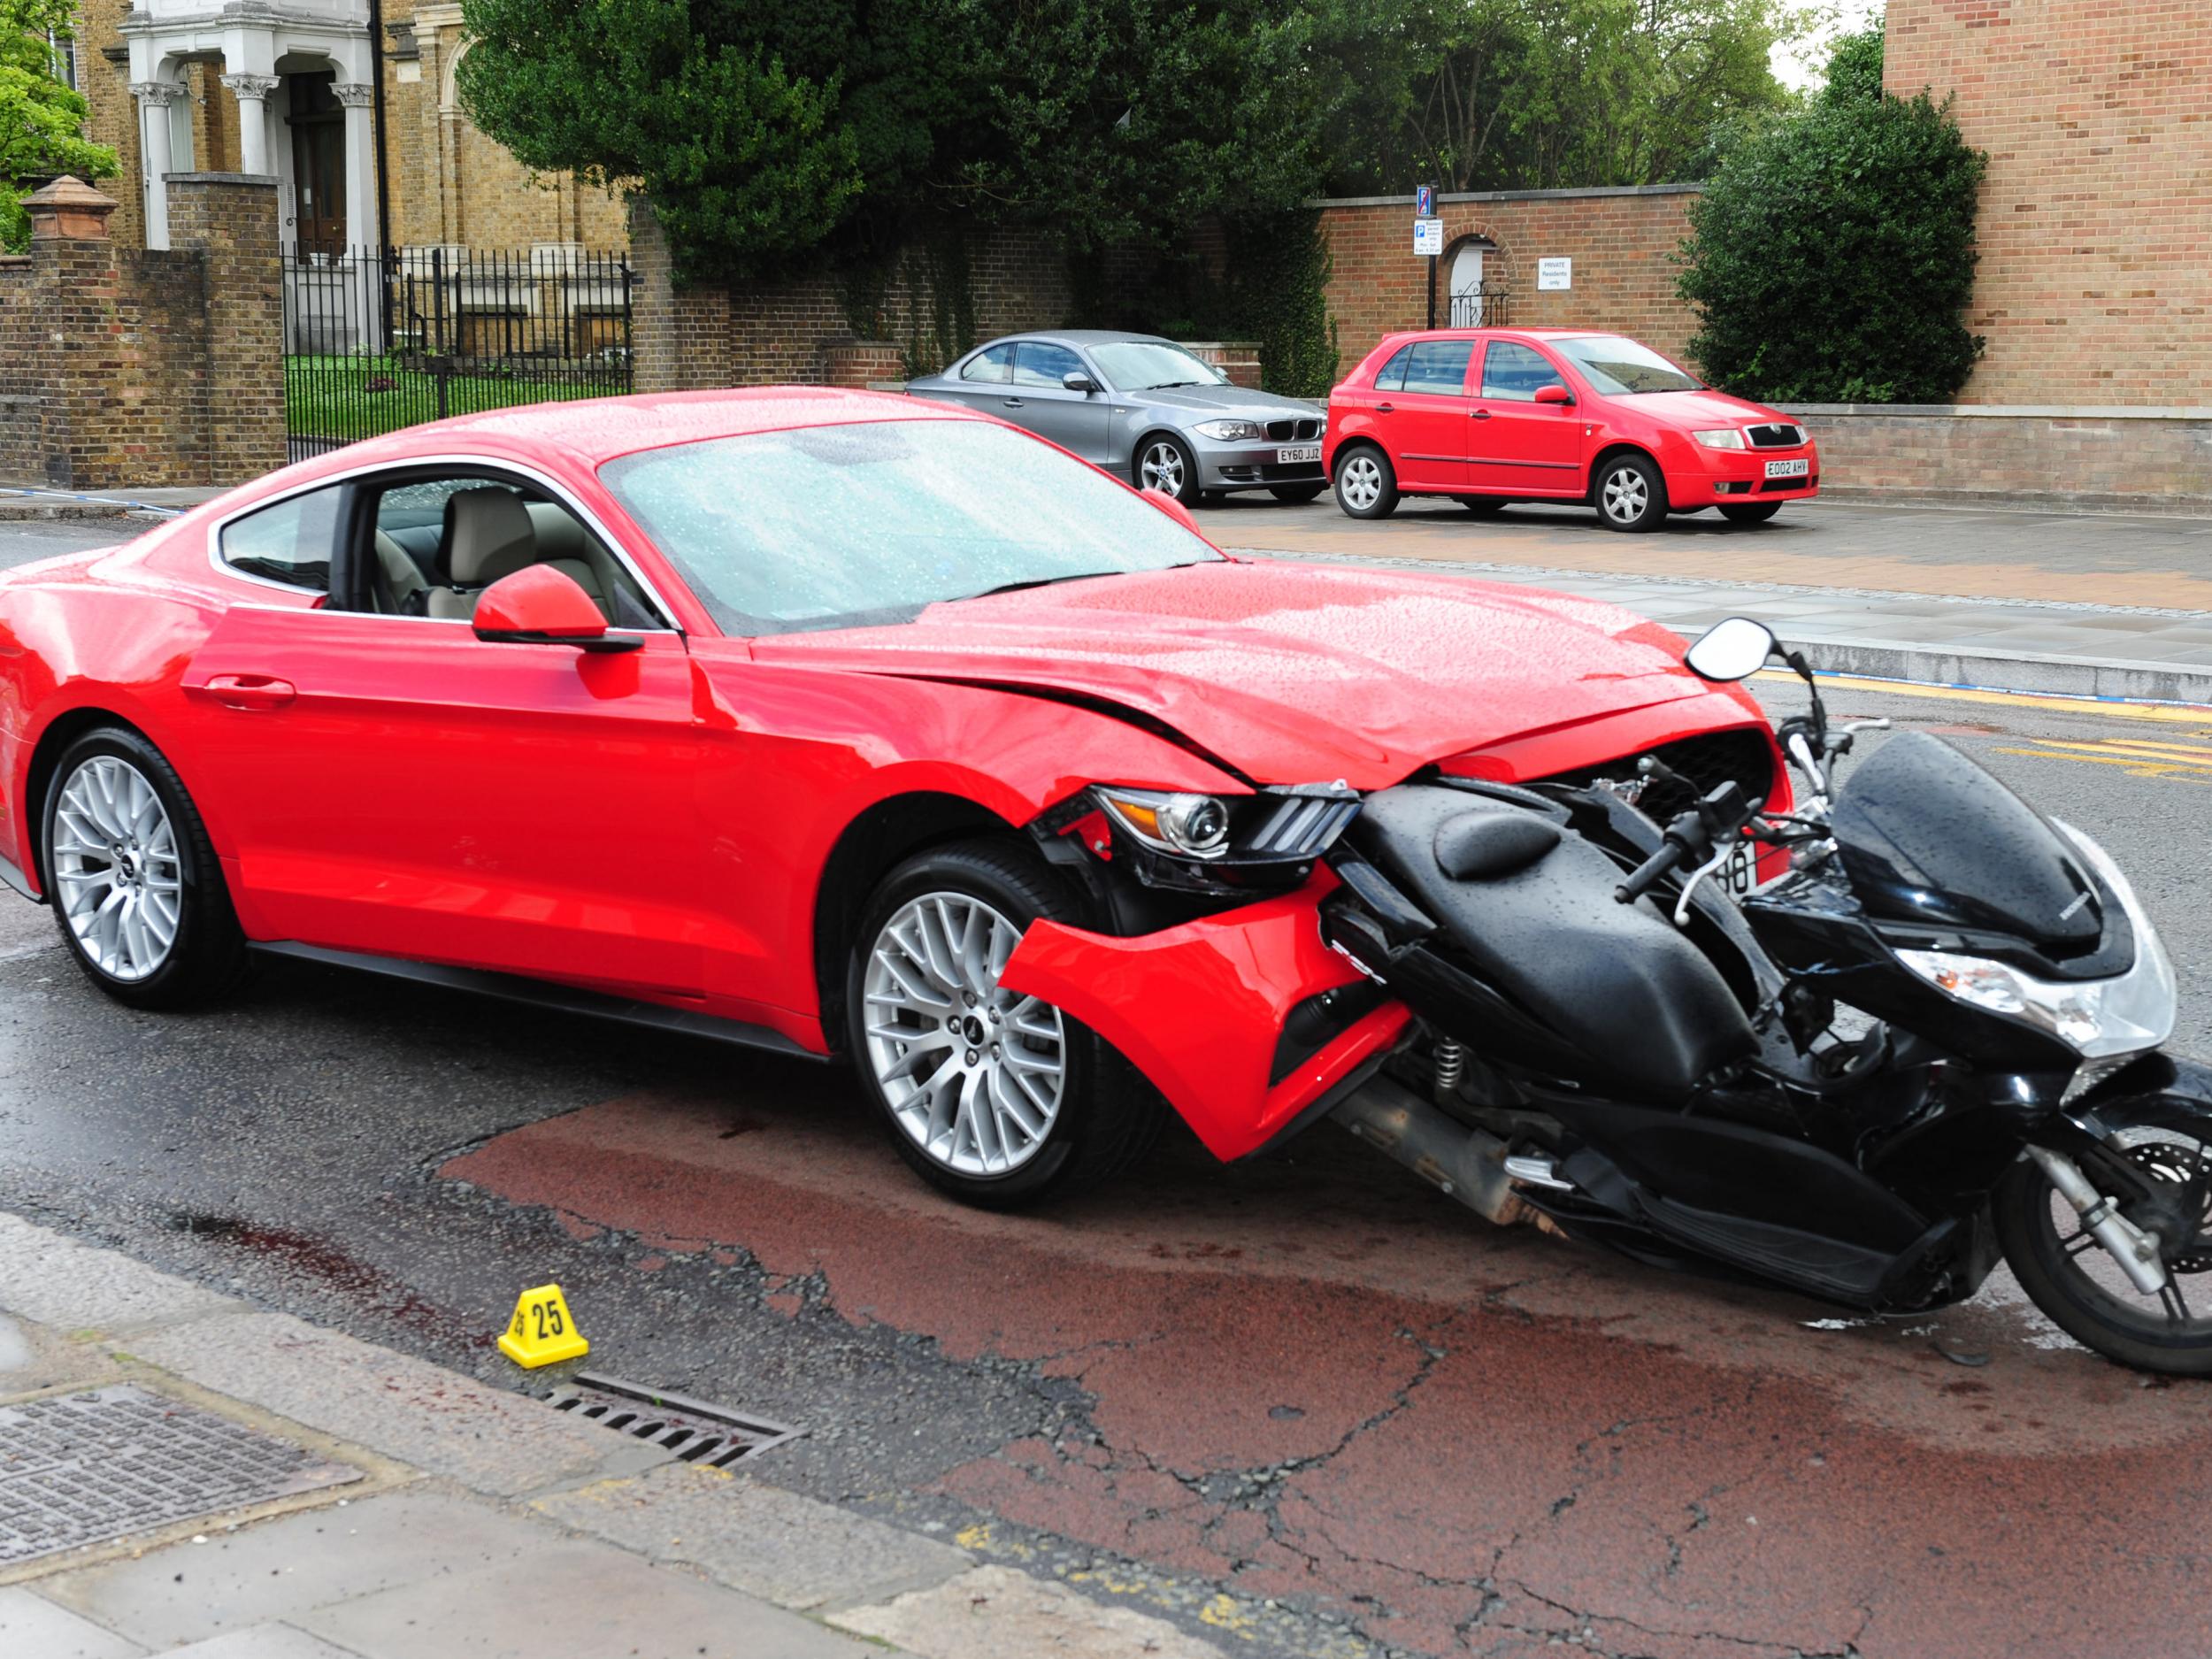 Bradley Clifford's red Ford Mustang after he crashed it into the moped carrying Soban Khan and Jahshua Francis in Enfield